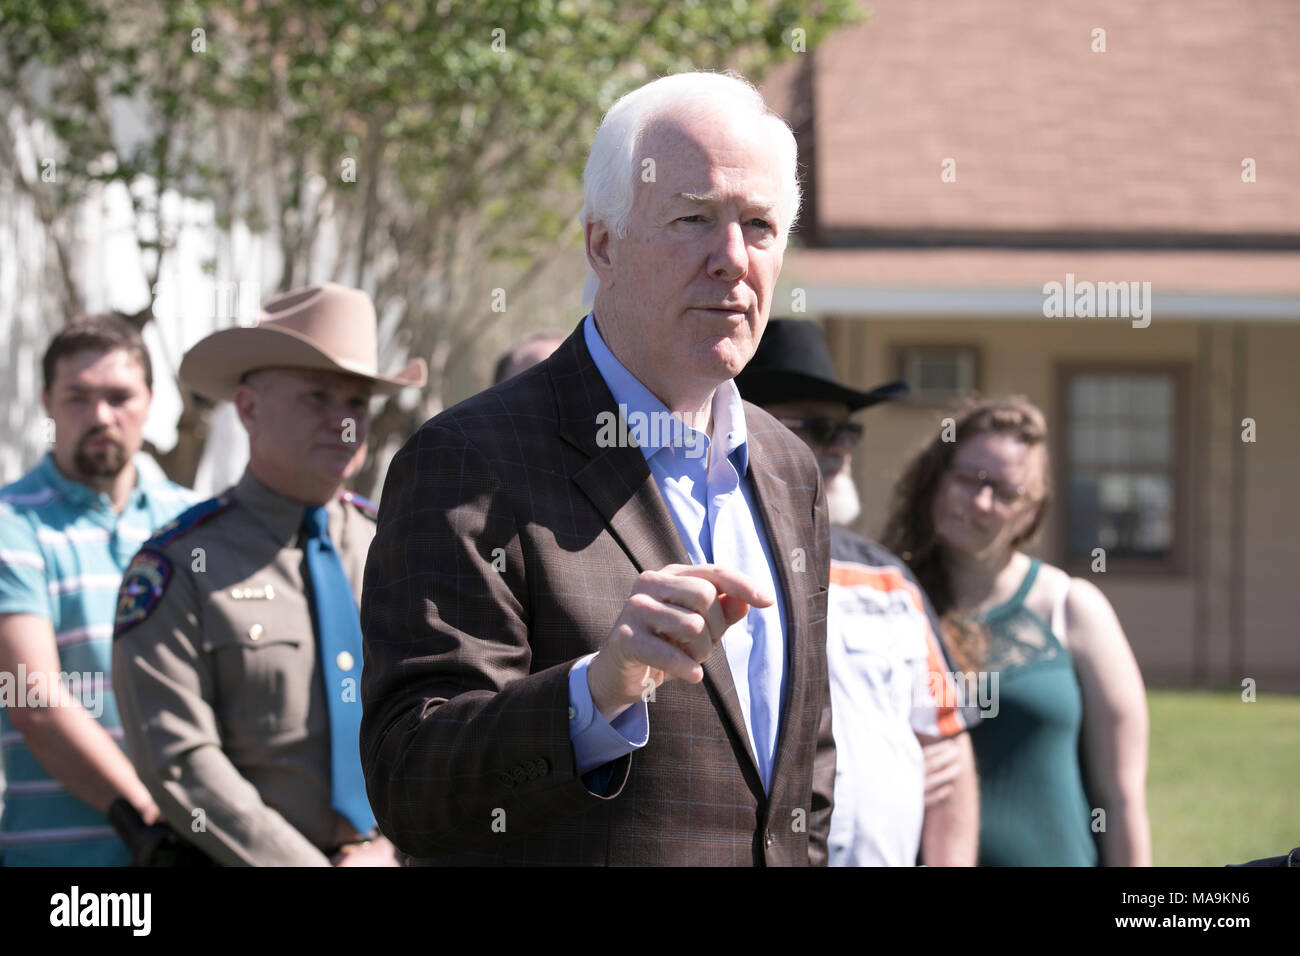 U.S. Sen. John Cornyn talks to the press about his Fix NICS Act, signed into law on March 23rd, in front of 1st Baptist Church of Sutherland Springs, TX, scene of a mass shooting in November 2017.  The bill strengthens criminal background checks intended to stop convicted felons and domestic abusers from purchasing firearms. Stock Photo